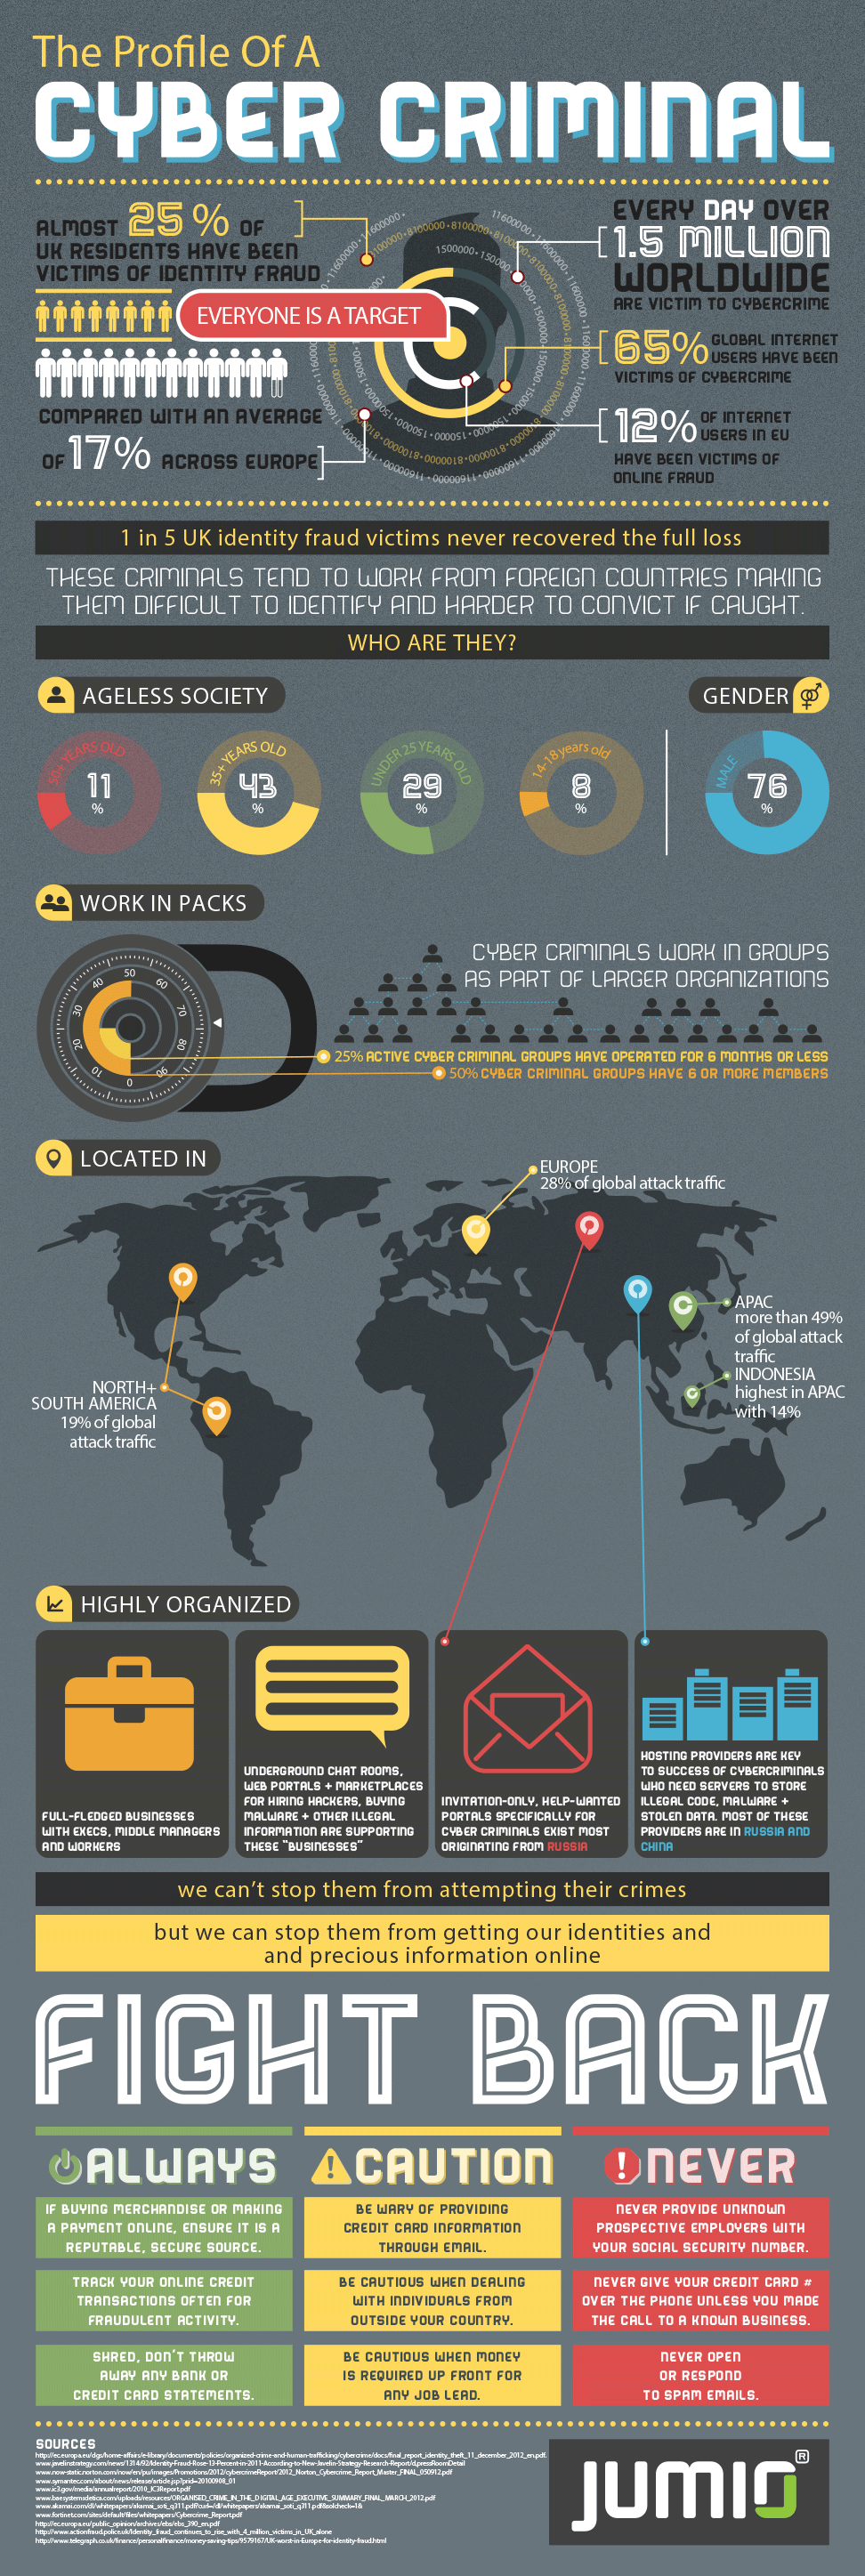 Infographic: The Profile of a Cyber Criminal (UK)